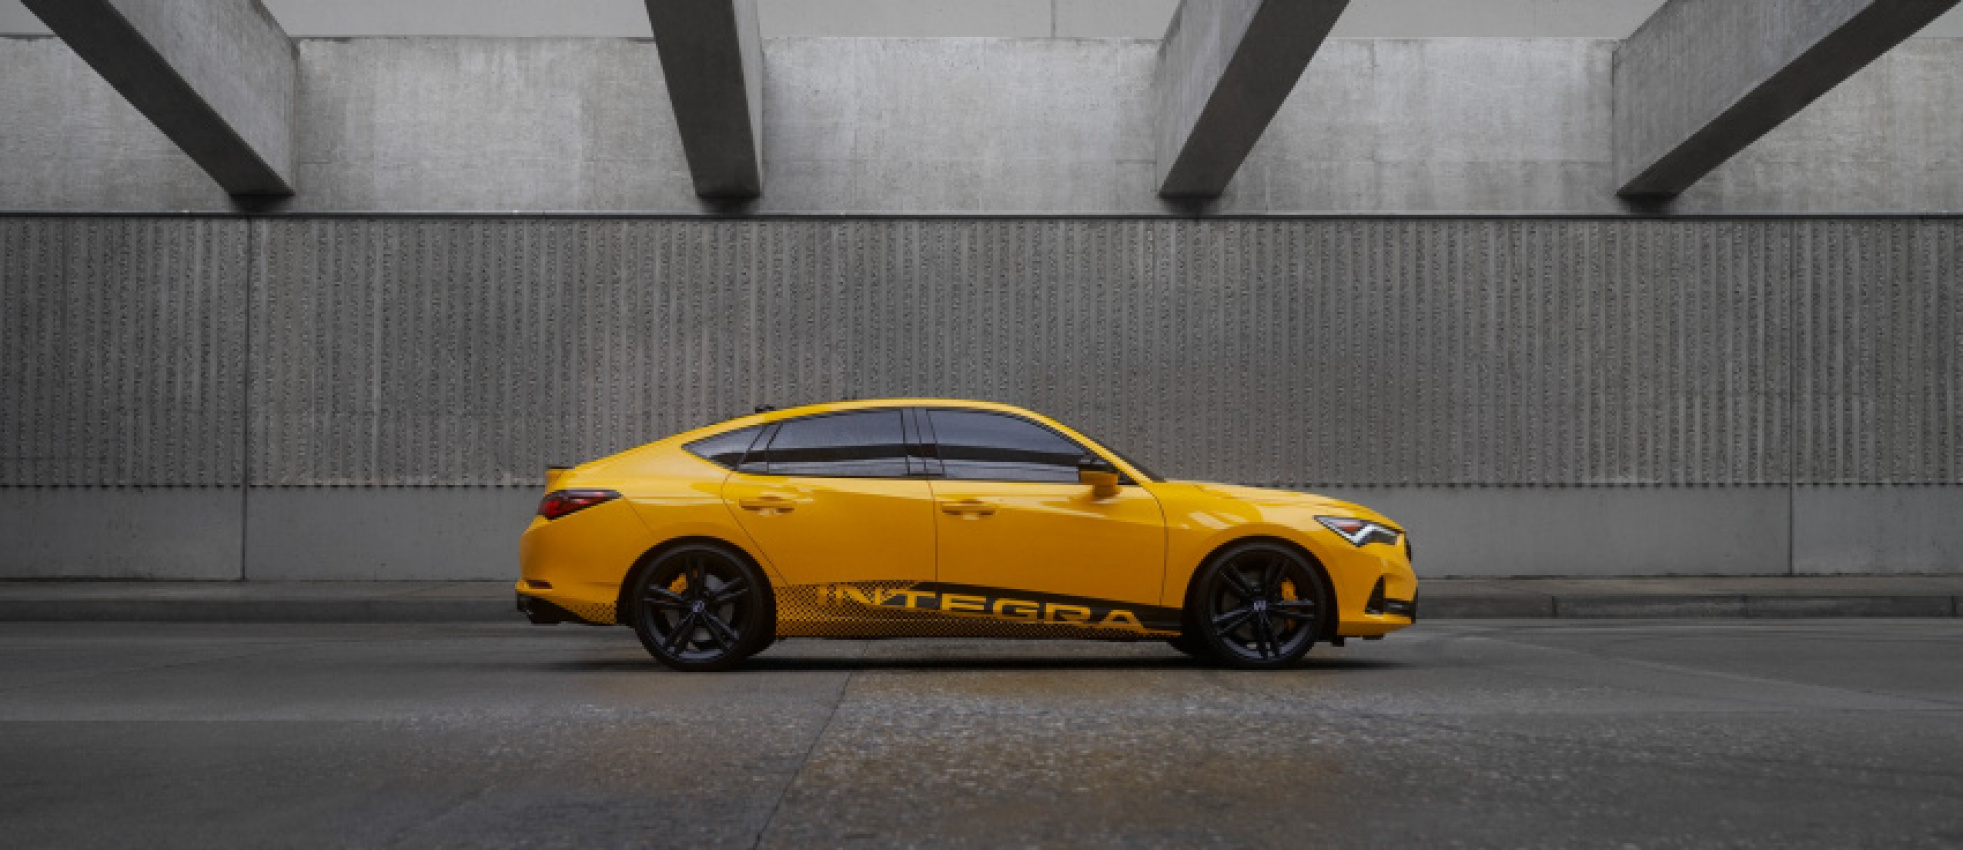 acura, autos, cars, news, acura integra, reports, acura appears open to an entry-level crossover, but says the integra is “fighting the fight against cuvs”